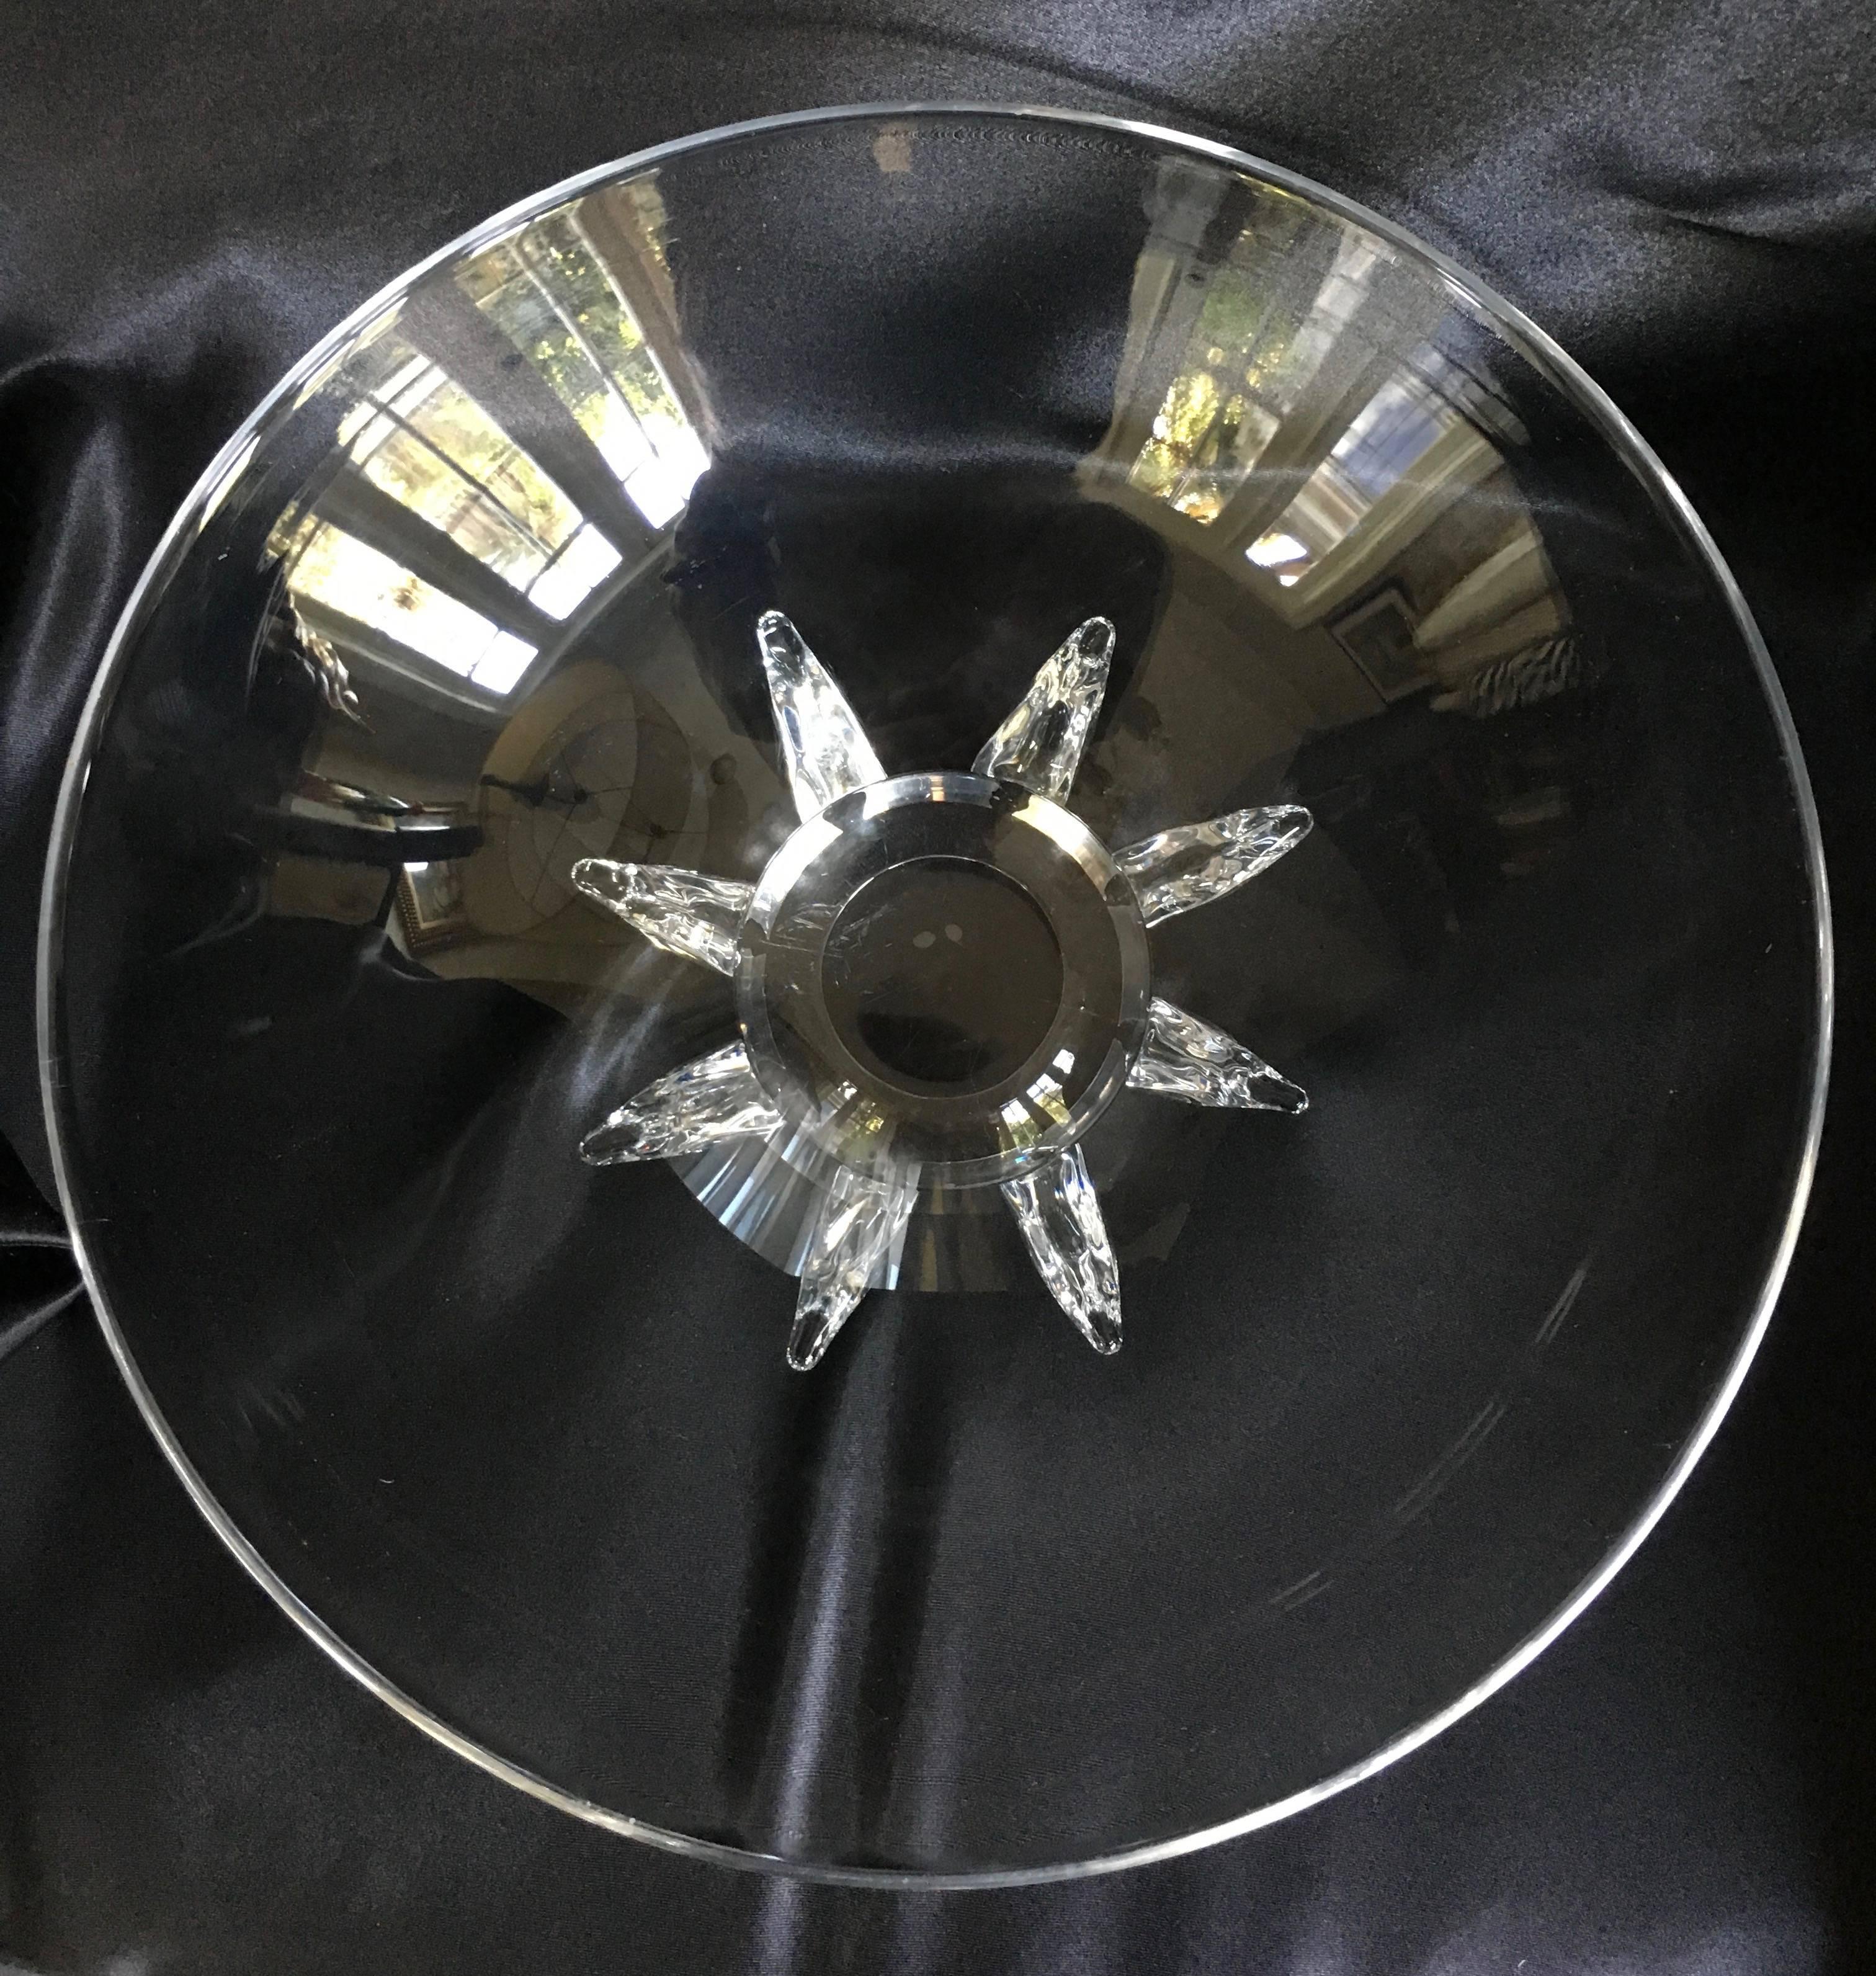 A very large and impressive Steuben starfish bowl or centrepiece. The glass is perfect with no chips or dings, sitting on an beautifully intricate designed base.